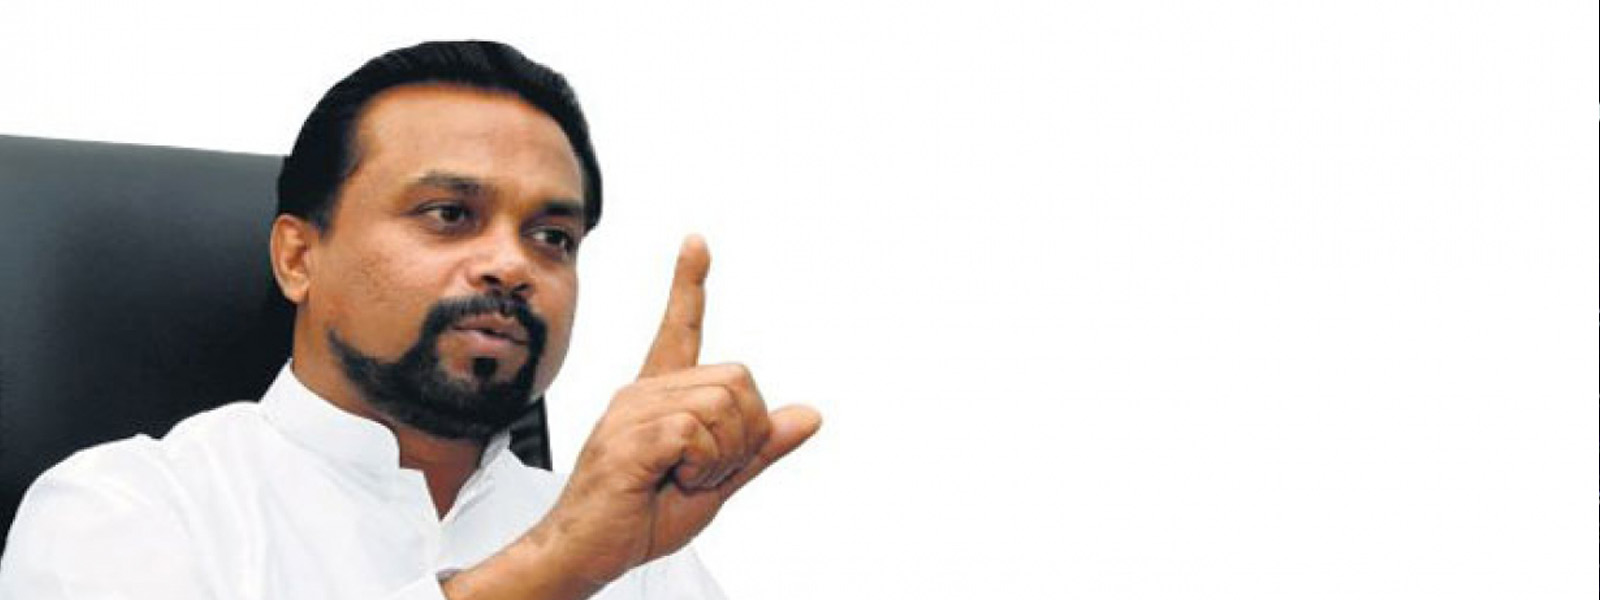 Weerawansa to pay Rs. 10 Mn for IP violation 